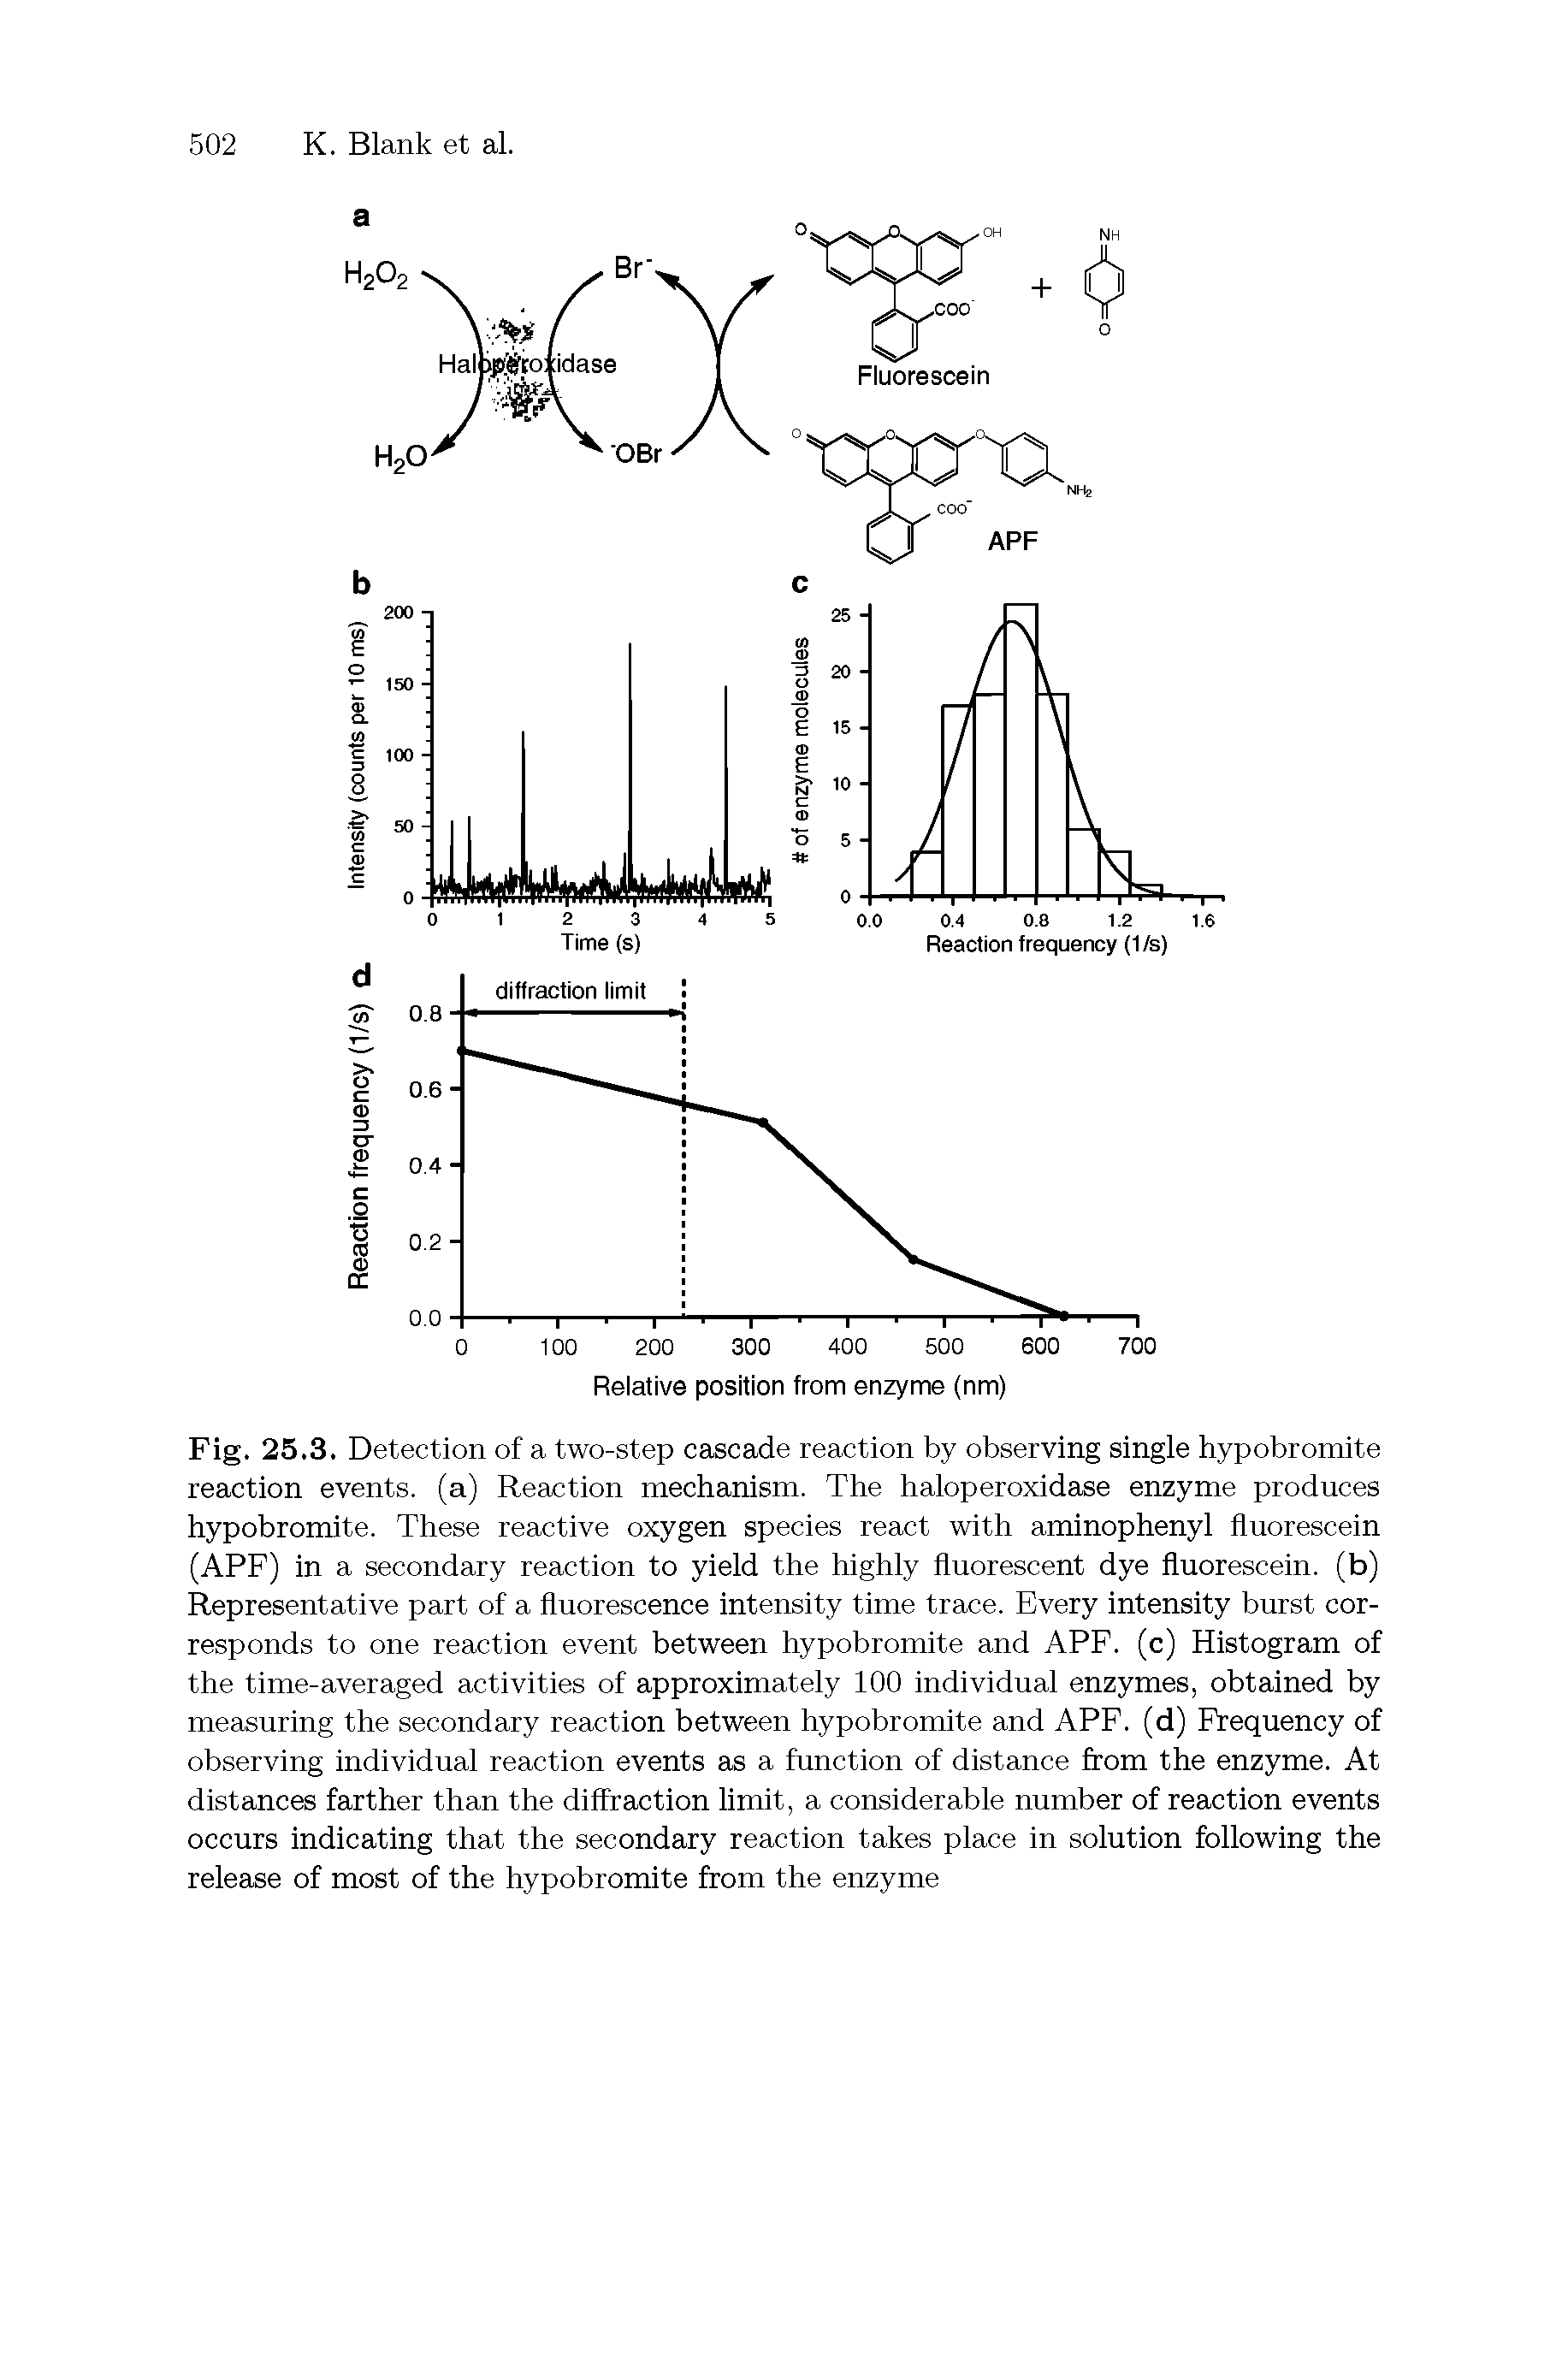 Fig. 25.3. Detection of a two-step cascade reaction by observing single hypobromite reaction events, (a) Reaction mechanism. The haloperoxidase enzyme produces hypobromite. These reactive oxygen species react with aminophenyl fluorescein (APF) in a secondary reaction to yield the highly fluorescent dye fluorescein, (b) Representative part of a fluorescence intensity time trace. Every intensity burst corresponds to one reaction event between hypobromite and APF. (c) Histogram of the time-averaged activities of approximately 100 individual enzymes, obtained by measuring the secondary reaction between hypobromite and APF. (d) Frequency of observing individual reaction events as a function of distance from the enzyme. At distances farther than the diffraction limit, a considerable number of reaction events occurs indicating that the secondary reaction takes place in solution following the release of most of the hypobromite from the enzyme...